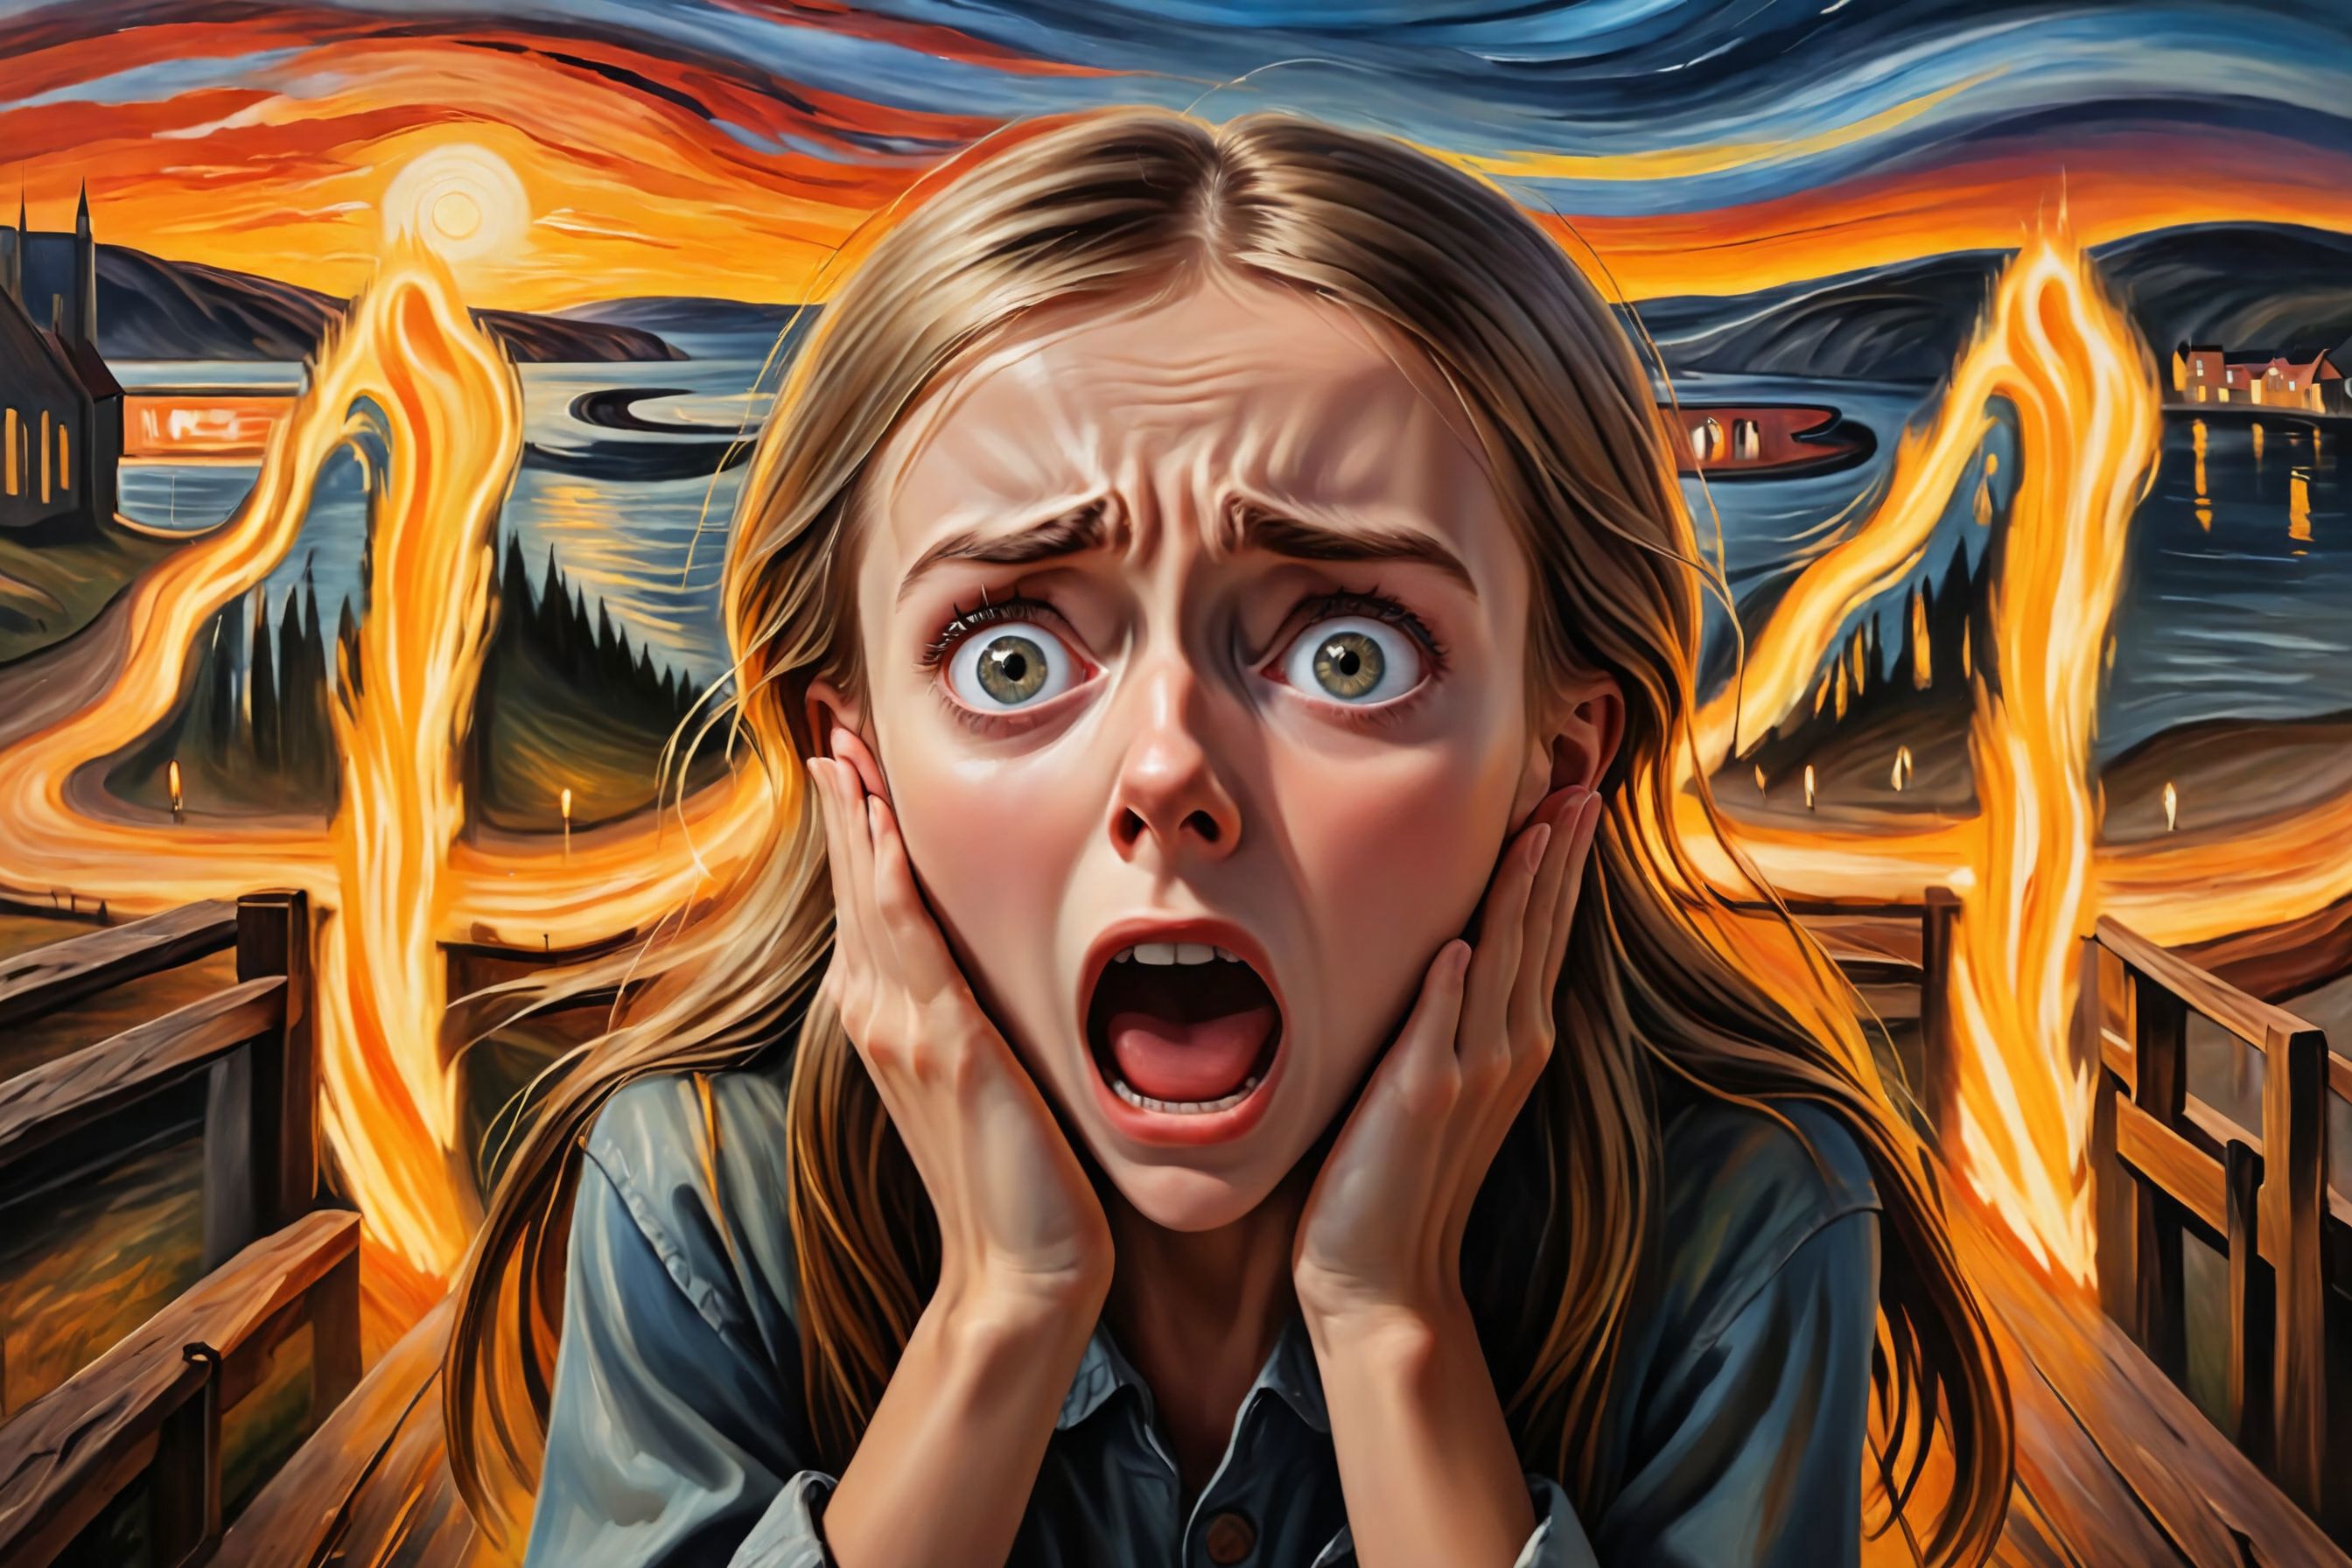 A Screaming Girl with Open Mouth and Wide Eyes in a Painting